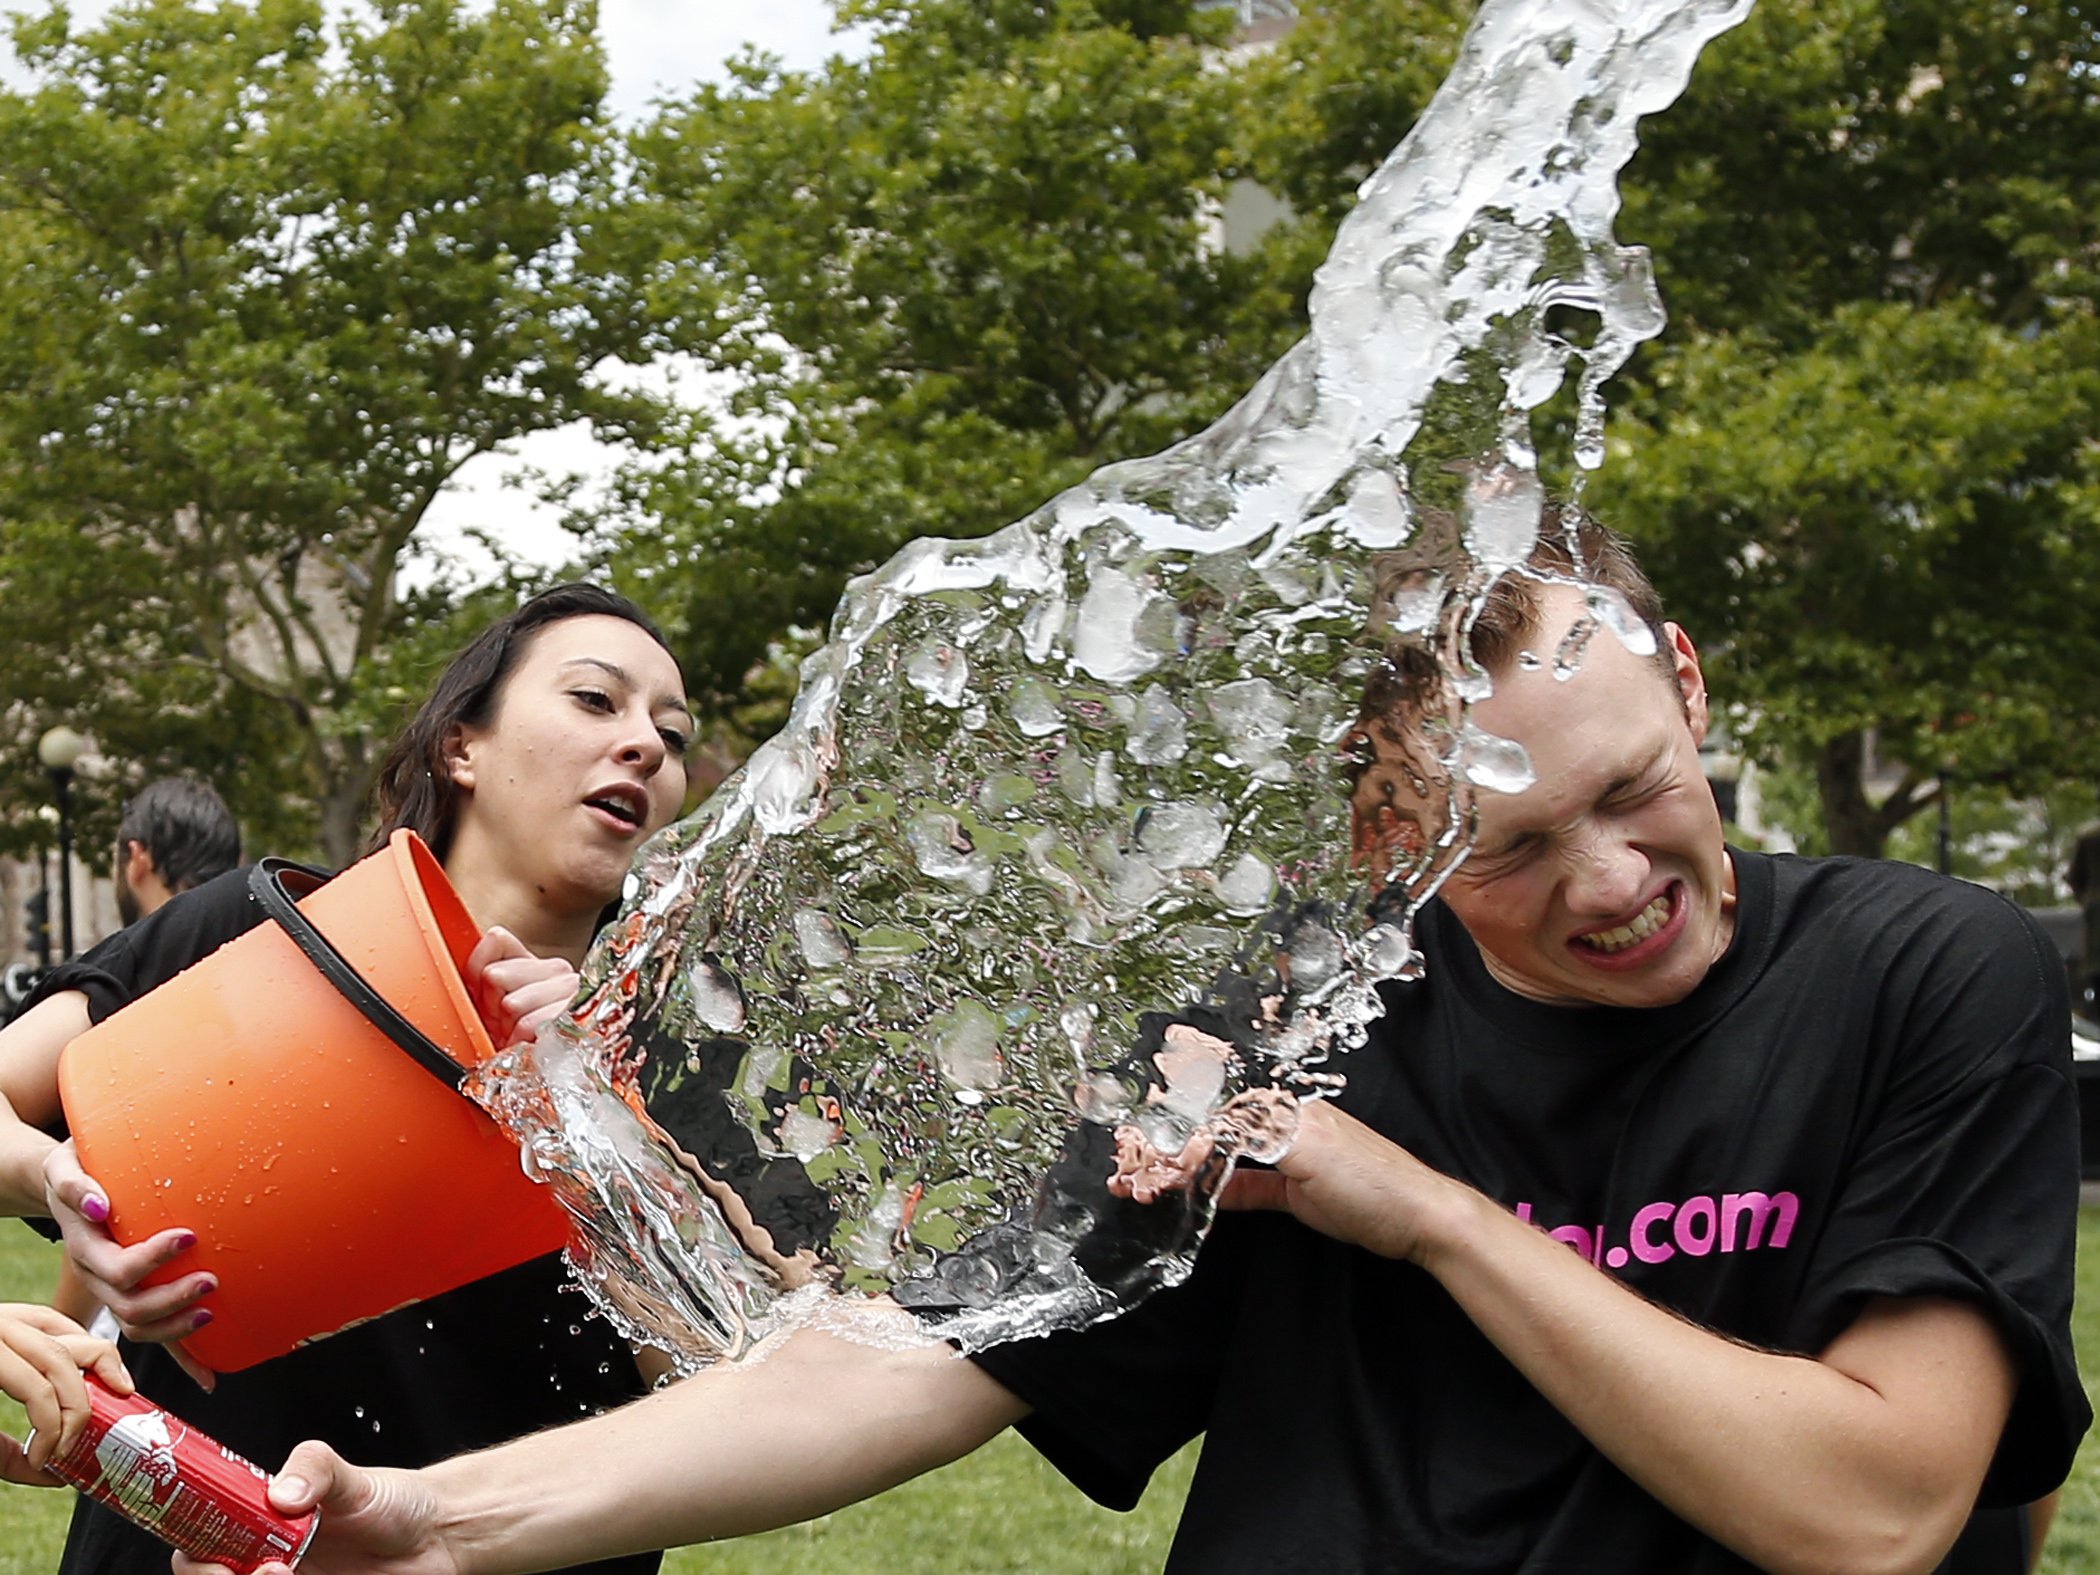 Beryl Lipton douses Matt Lee during the ice bucket challenge at Boston's Copley Square on August 7, 2014 to raise funds and awareness for ALS.